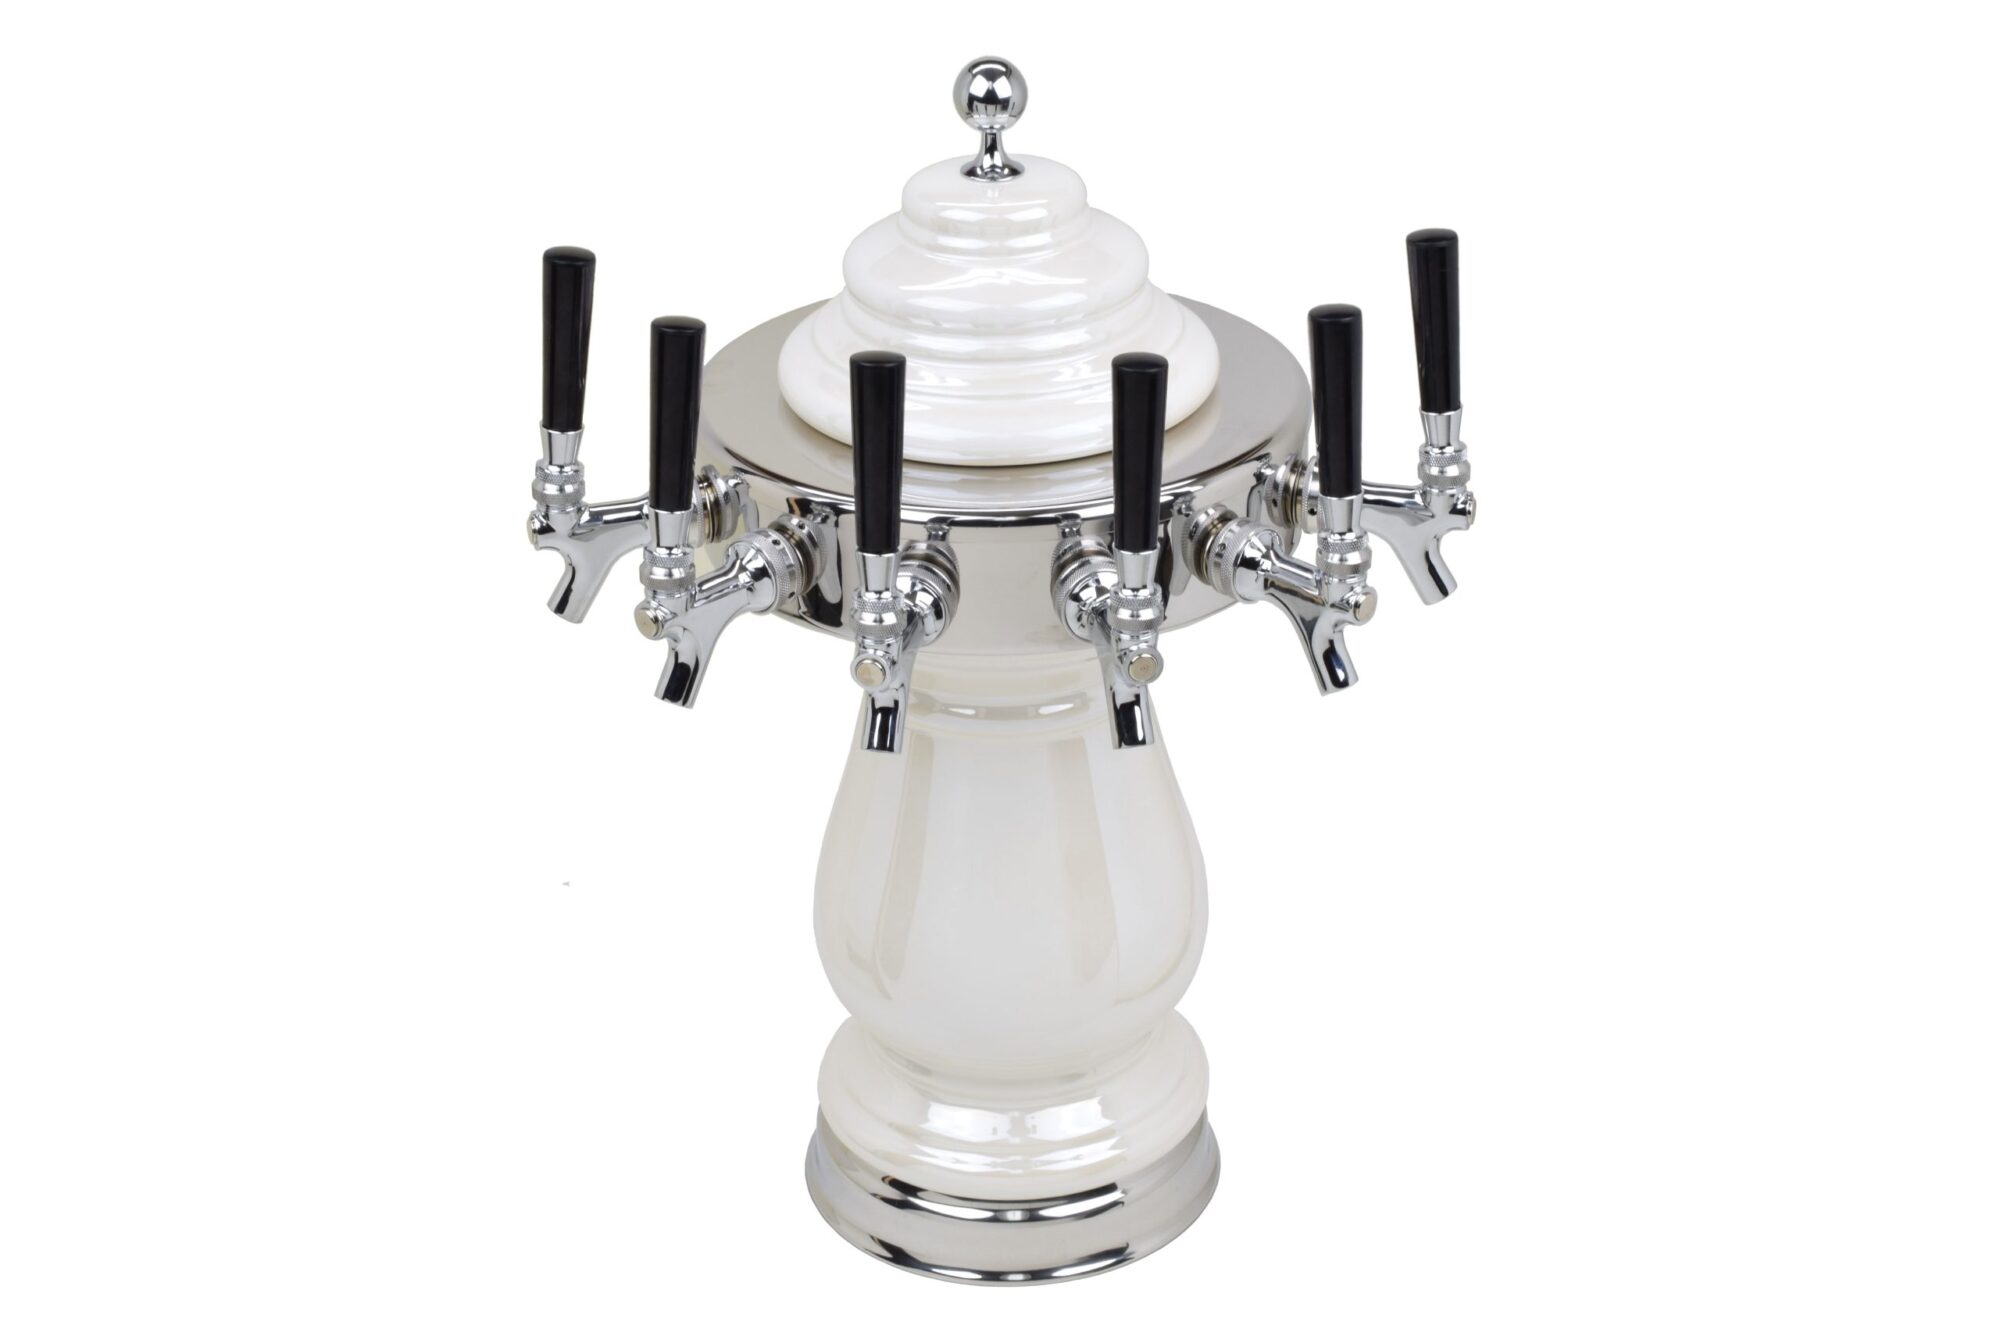 884C-6PW Six Faucet Ceramic Tower with Chrome Hardware and Faucets - Shown in Pearl White